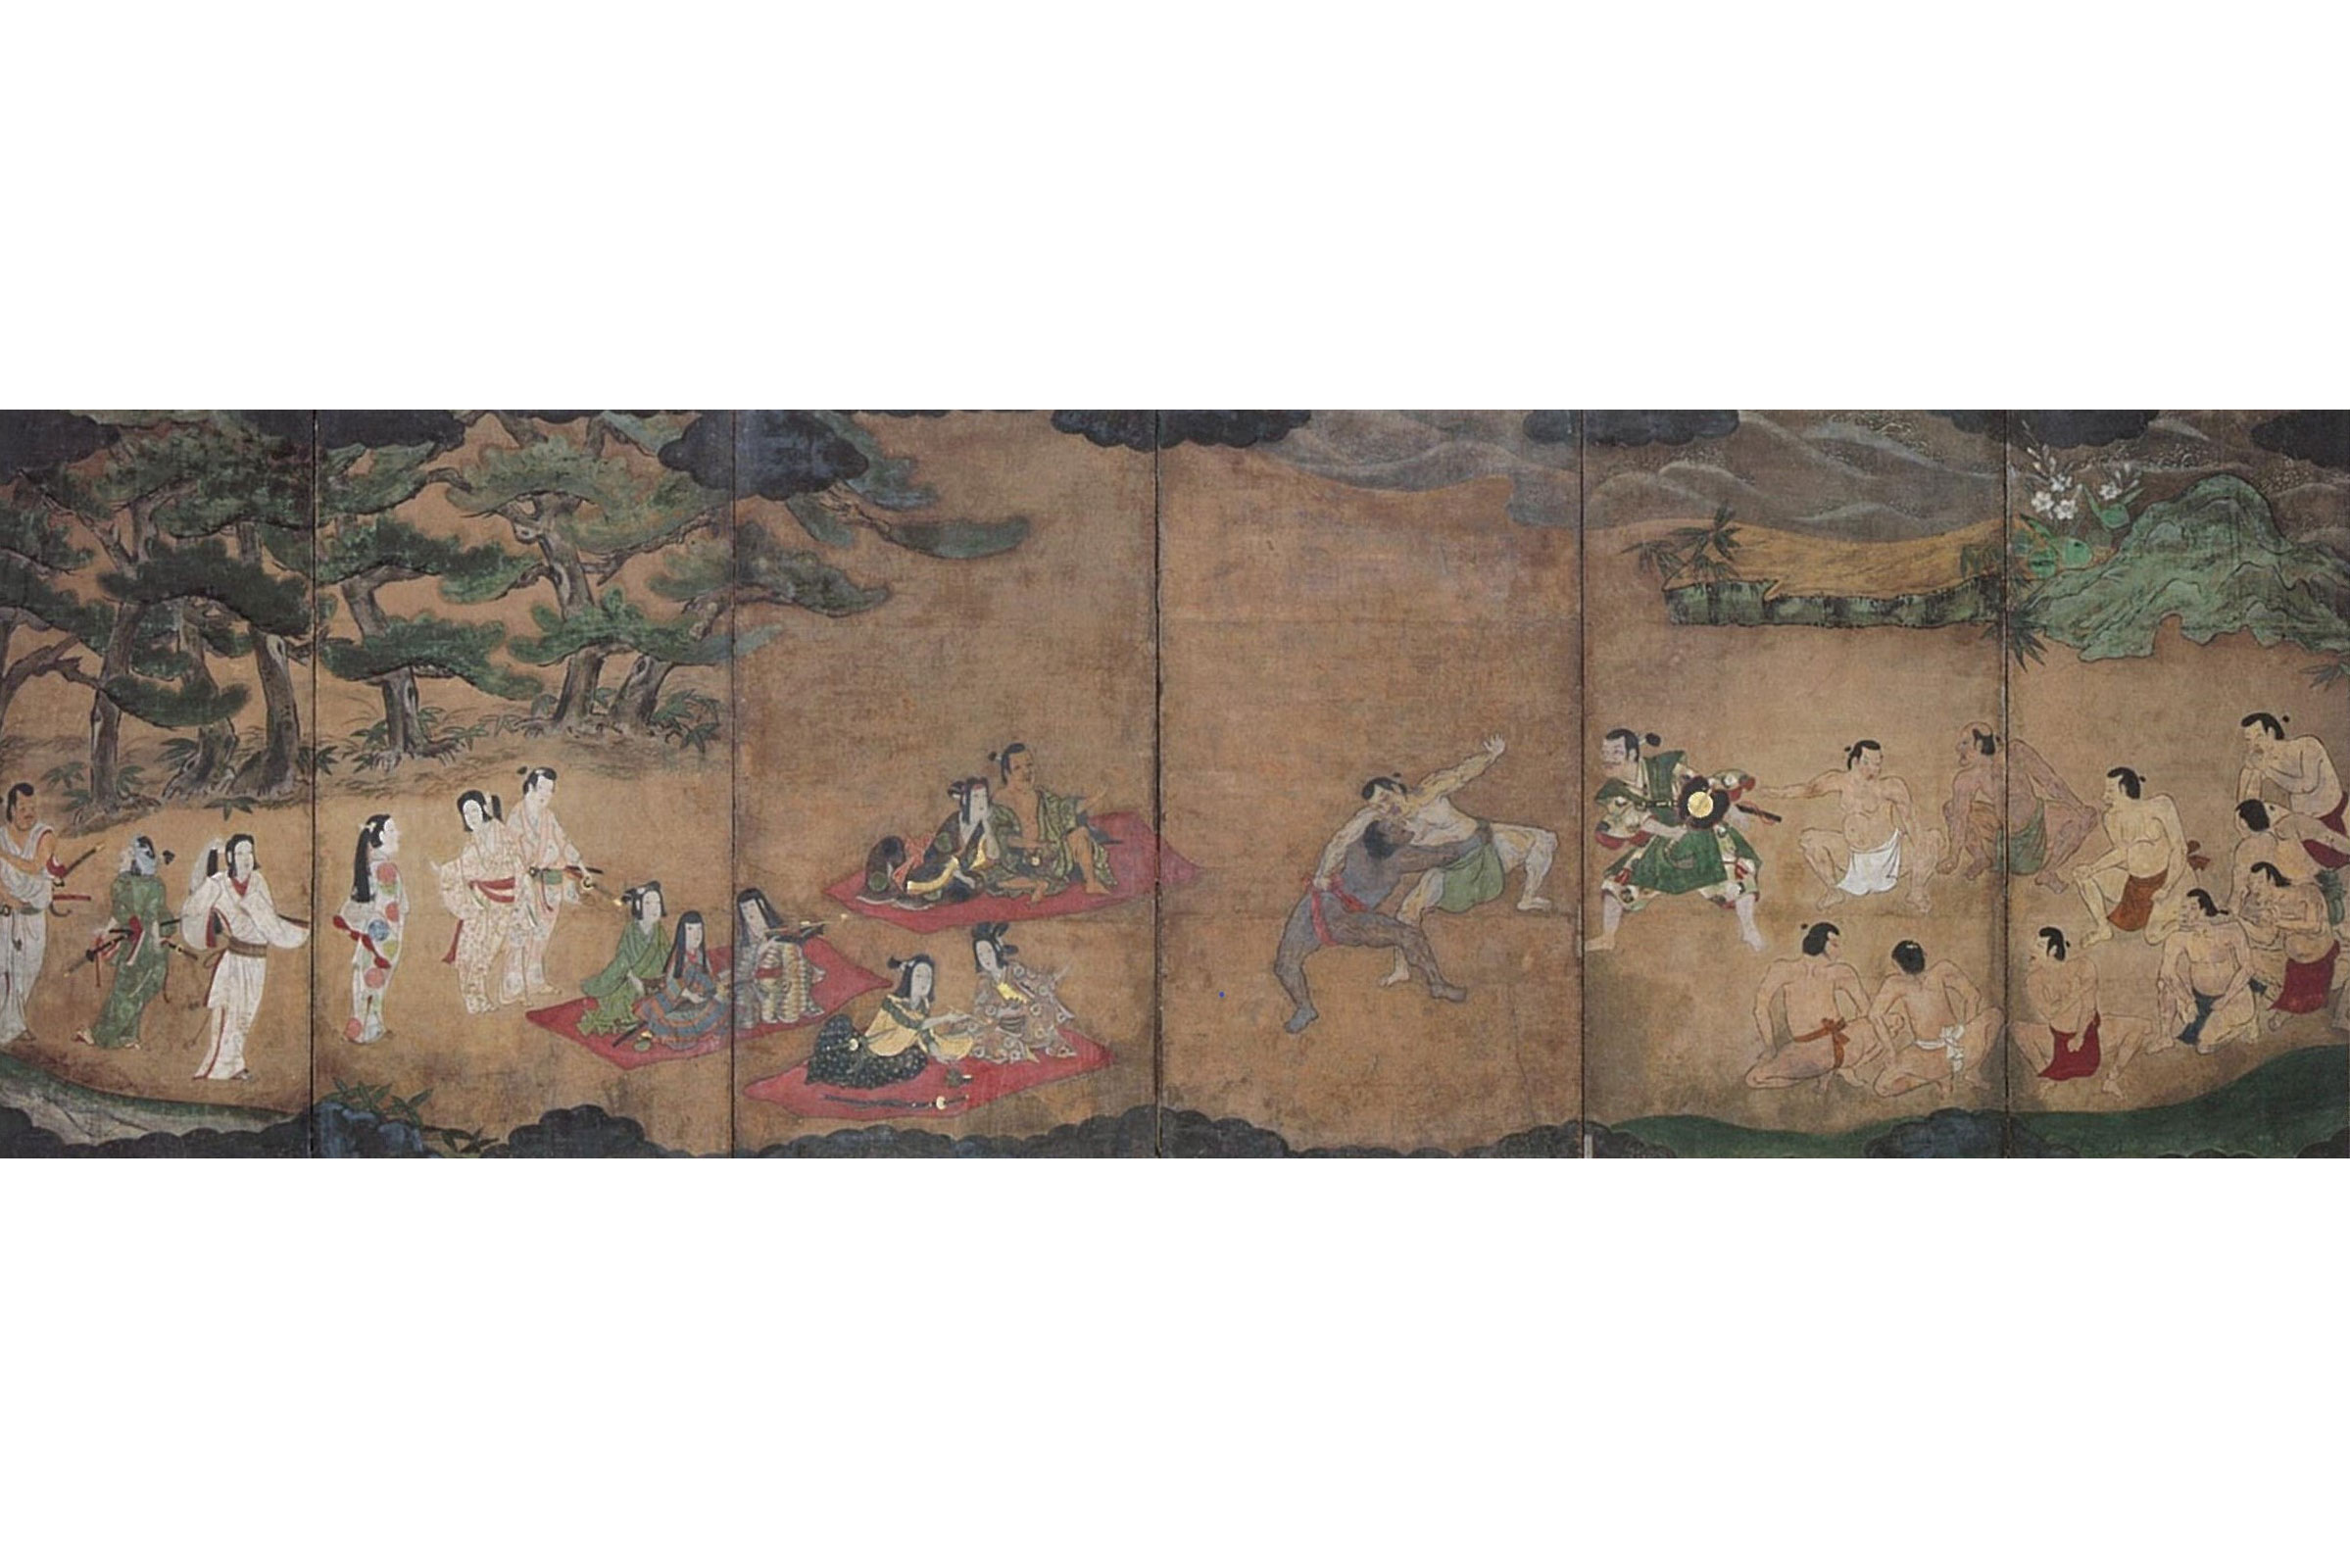 Sumō yūrakuzu byōbu, drawn in 1605 by an anonymous artist. Author Thomas Lockley said that the individual in green, in the third panel from the left, is believed to be Nobunaga. He said it's highly likely that the Black man depicted in the artwork is Yasuke. (Sacchisachi/Wiki Commons)